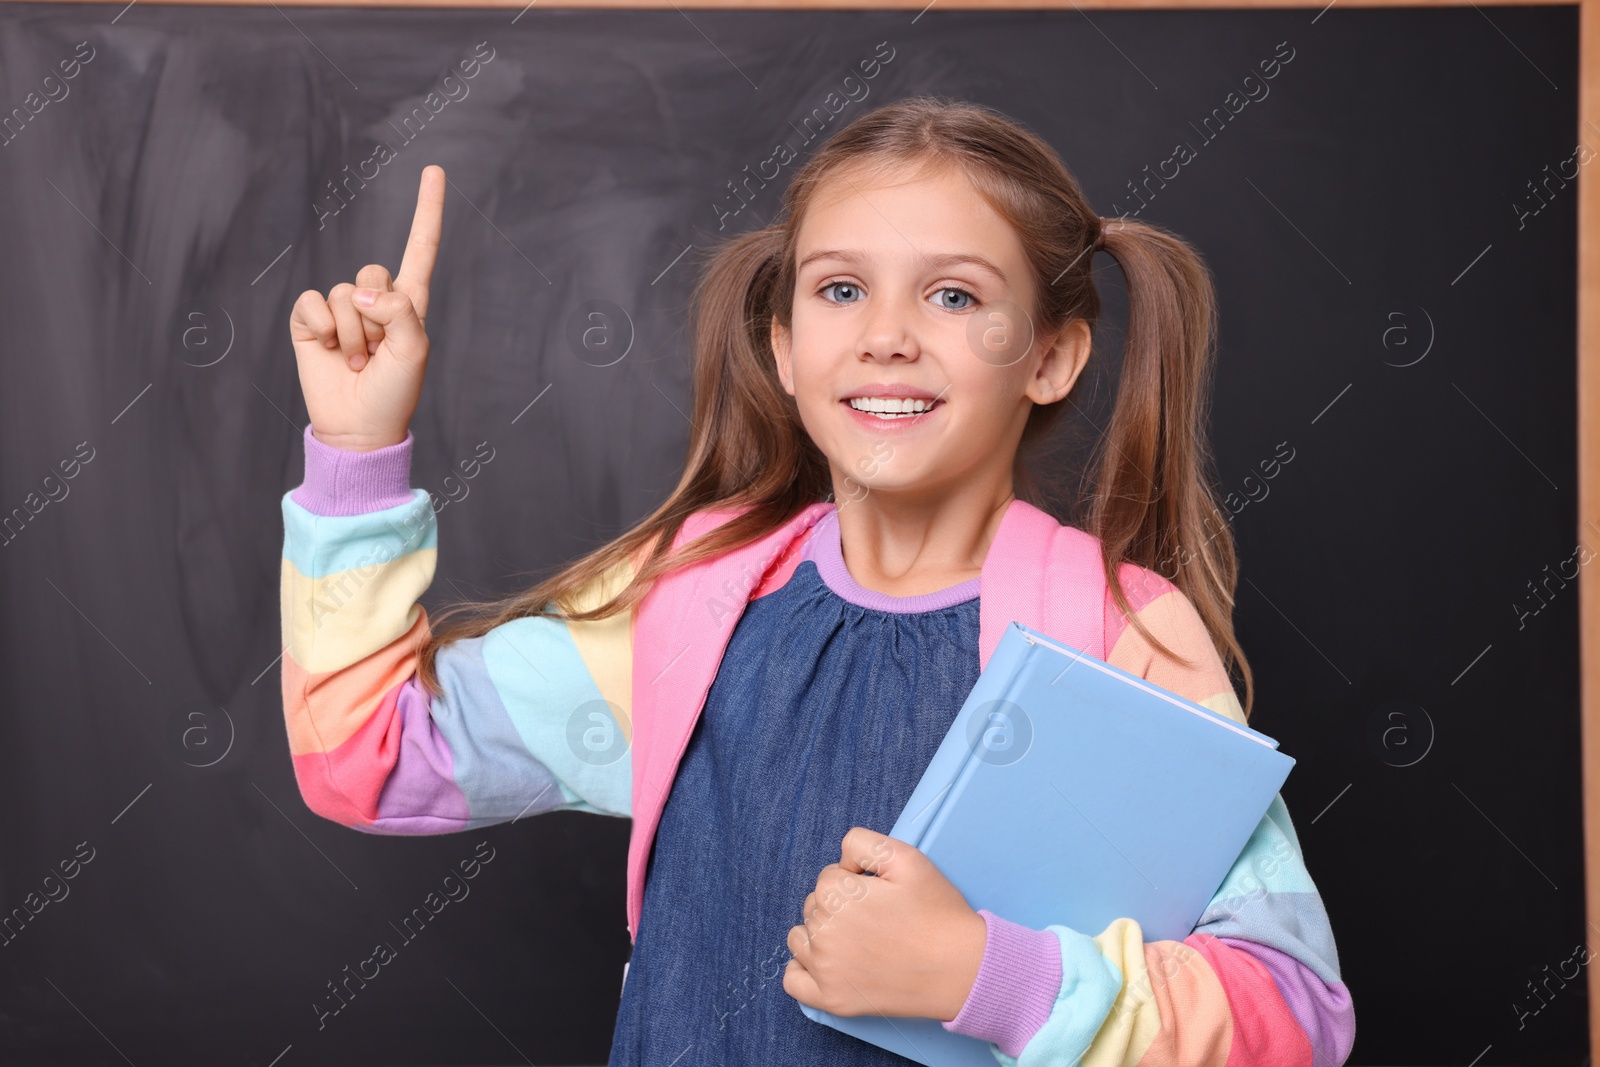 Photo of Smiling schoolgirl with book pointing at something near blackboard